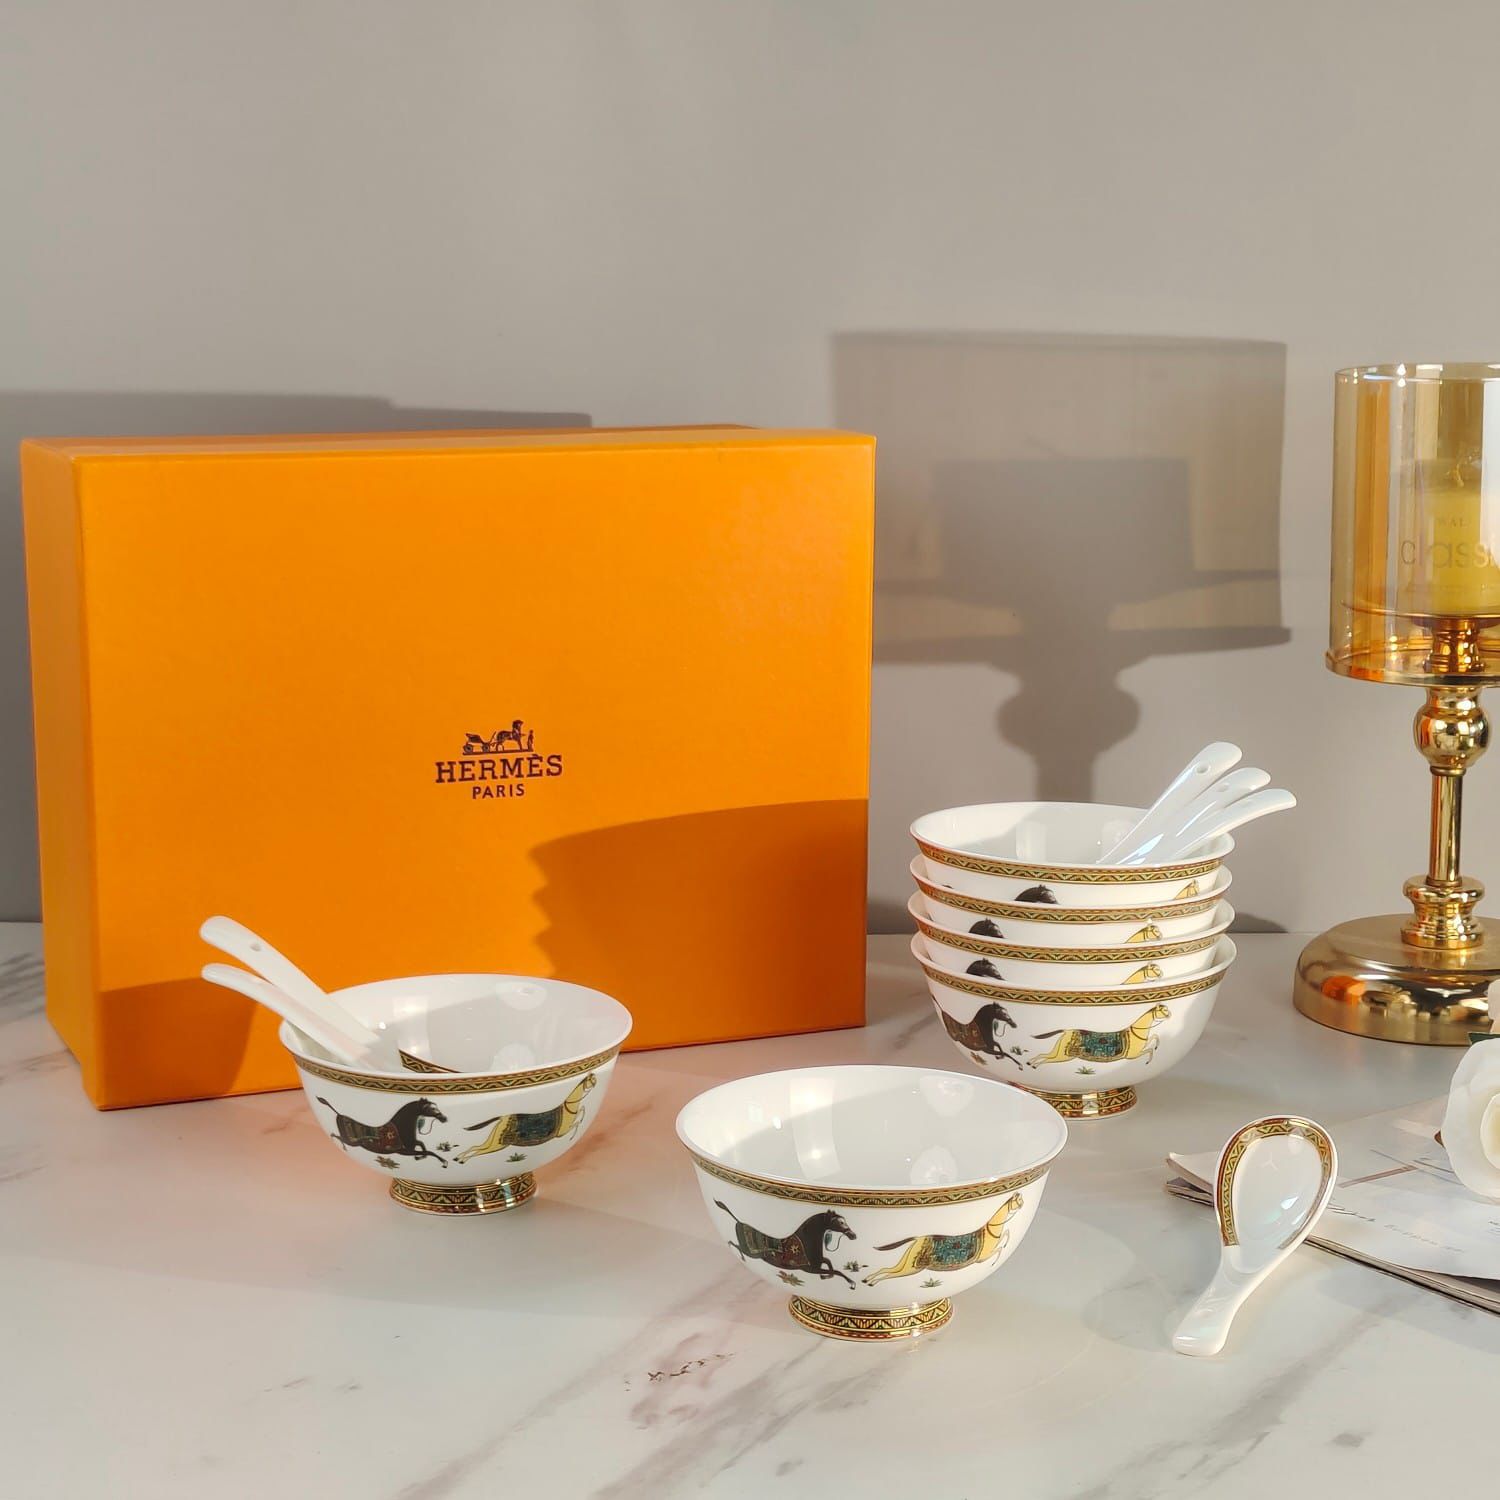 Dior soup set of six bowls with spoons, Hermes, Versace are also available